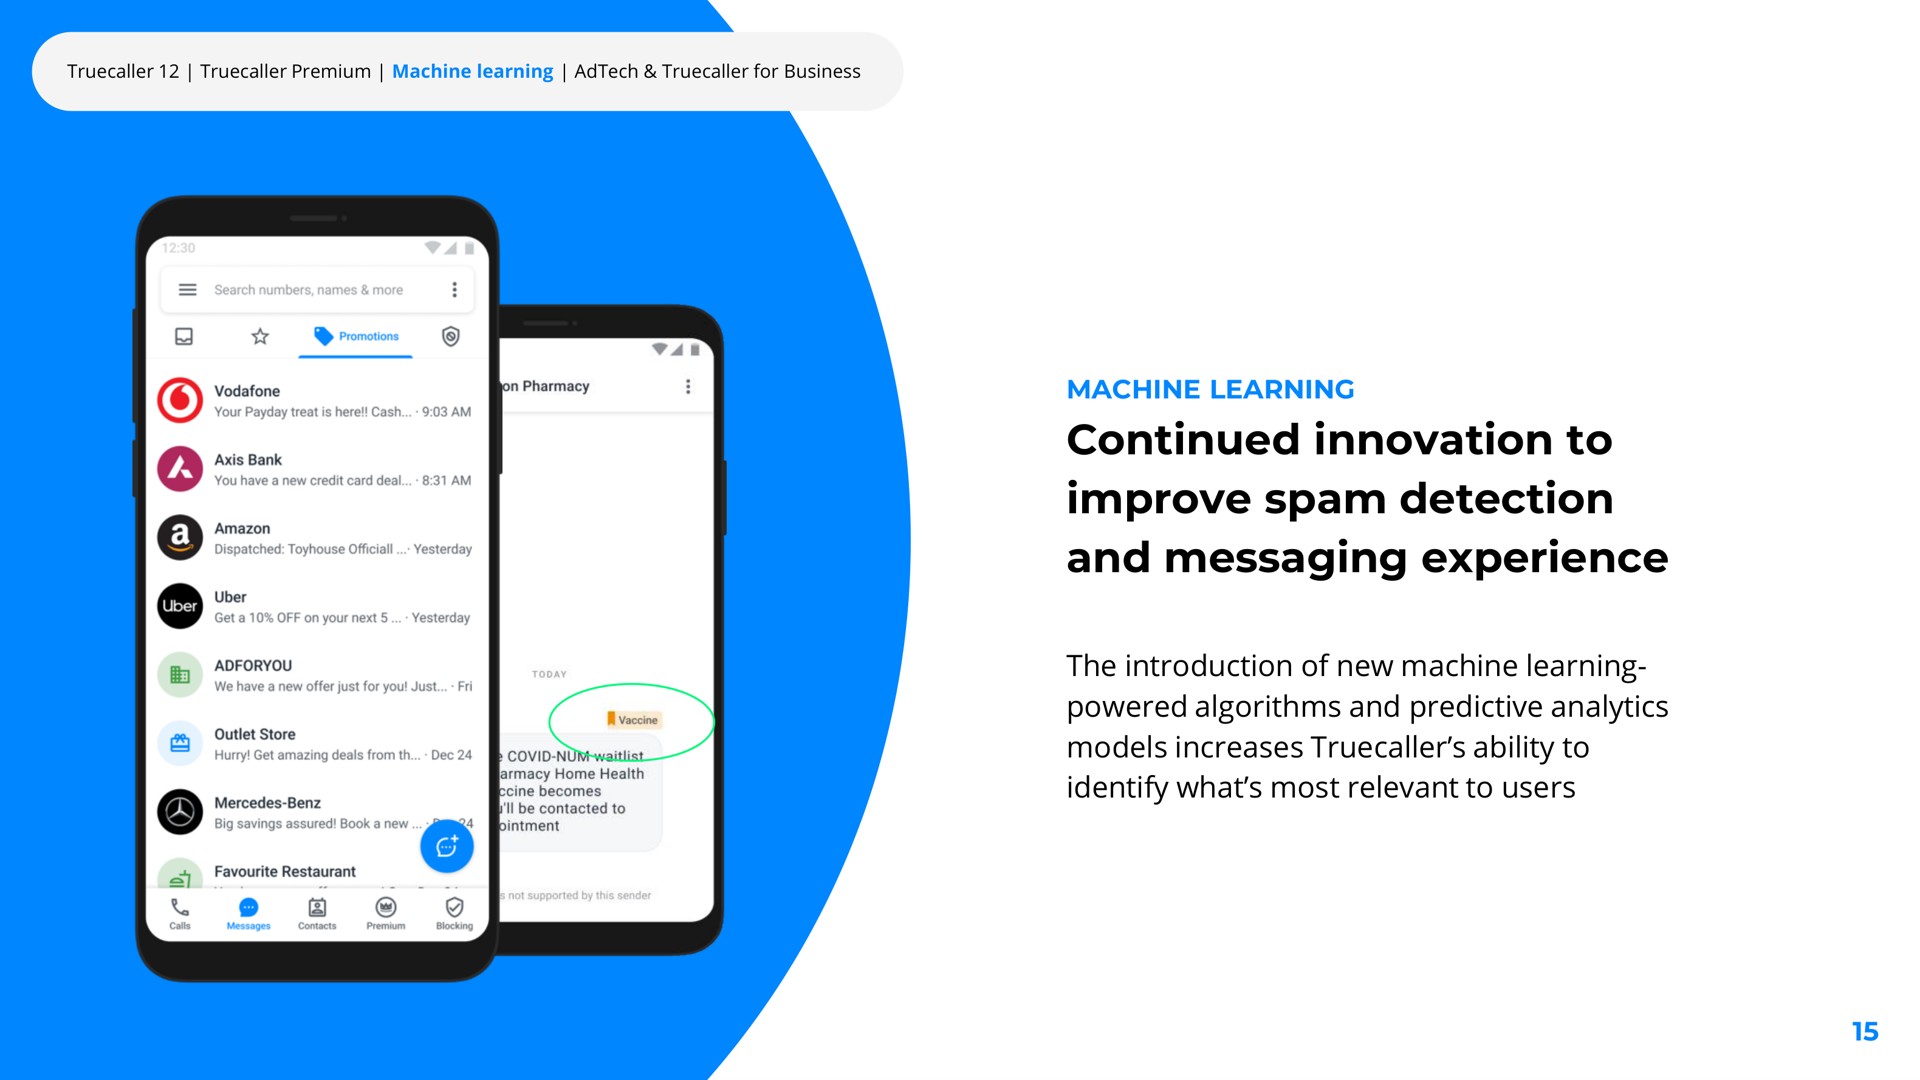 continued innovation to improve detection and messaging experience | Truecaller